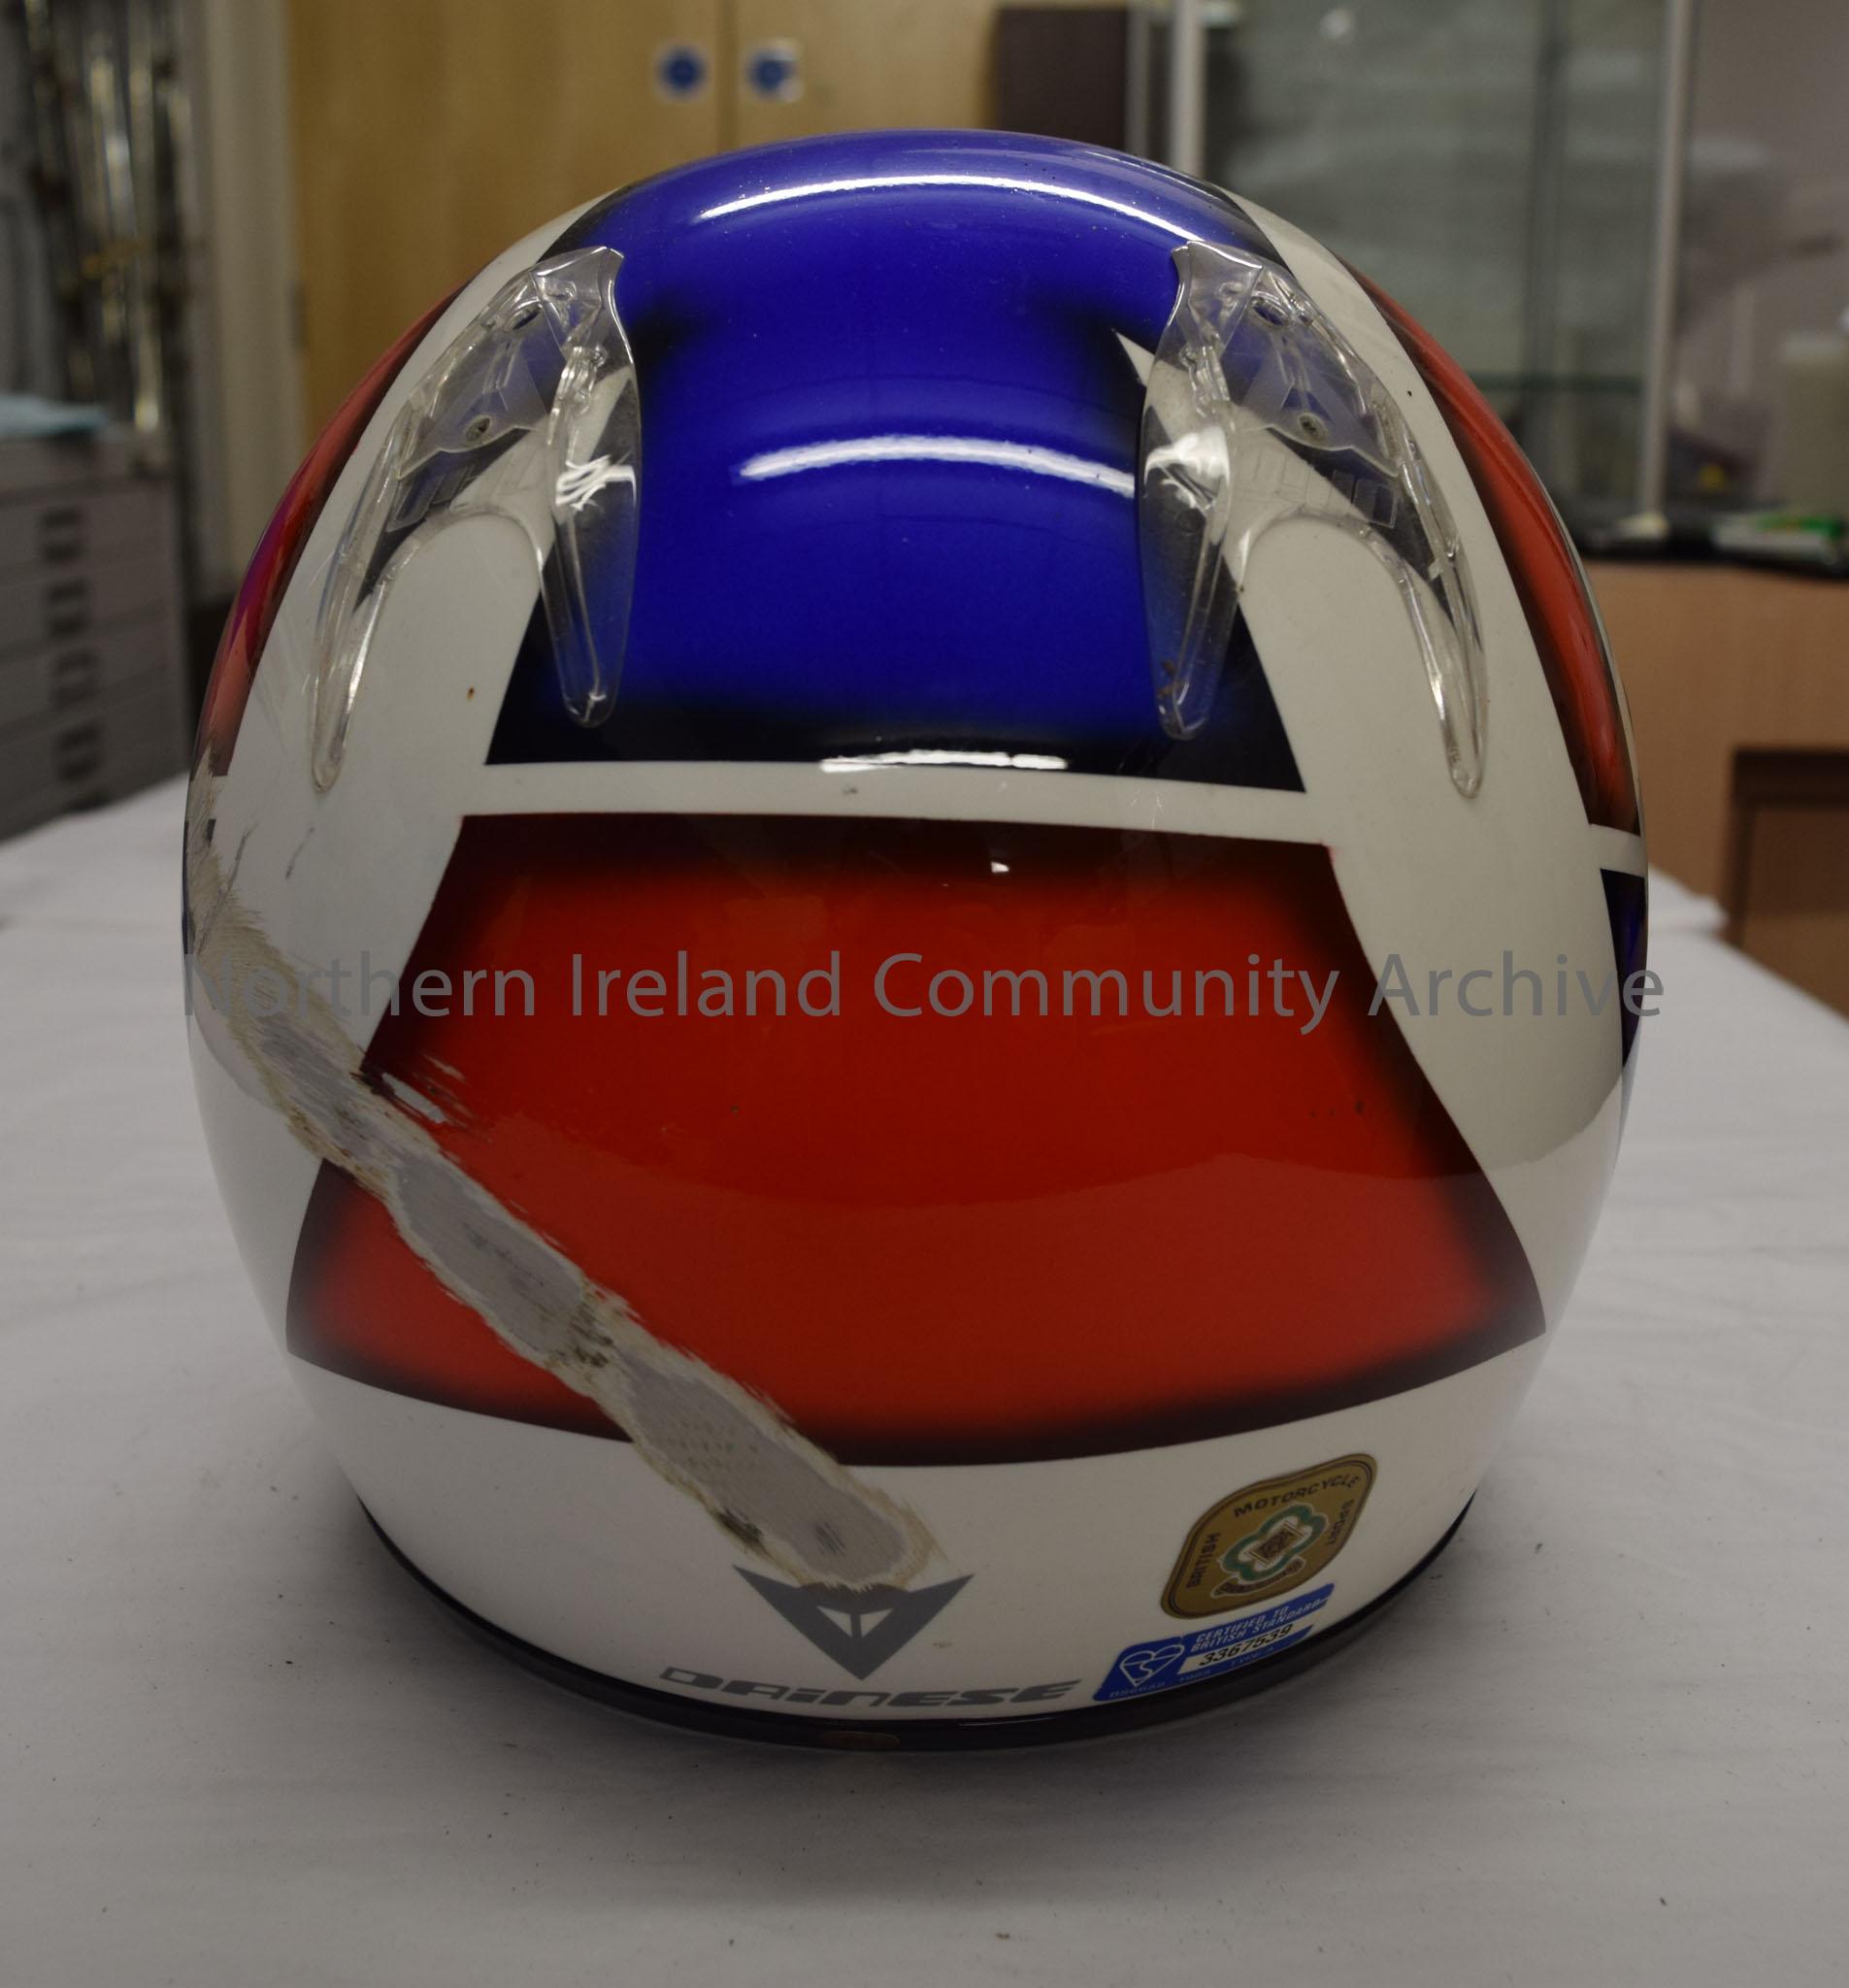 Dainese motorcycle helmet belonging to Paul Robinson. White helmet with blue stripe down the middle, blue chin bar and a red pattern on the sides. “Ma… – 2016.87 (4)